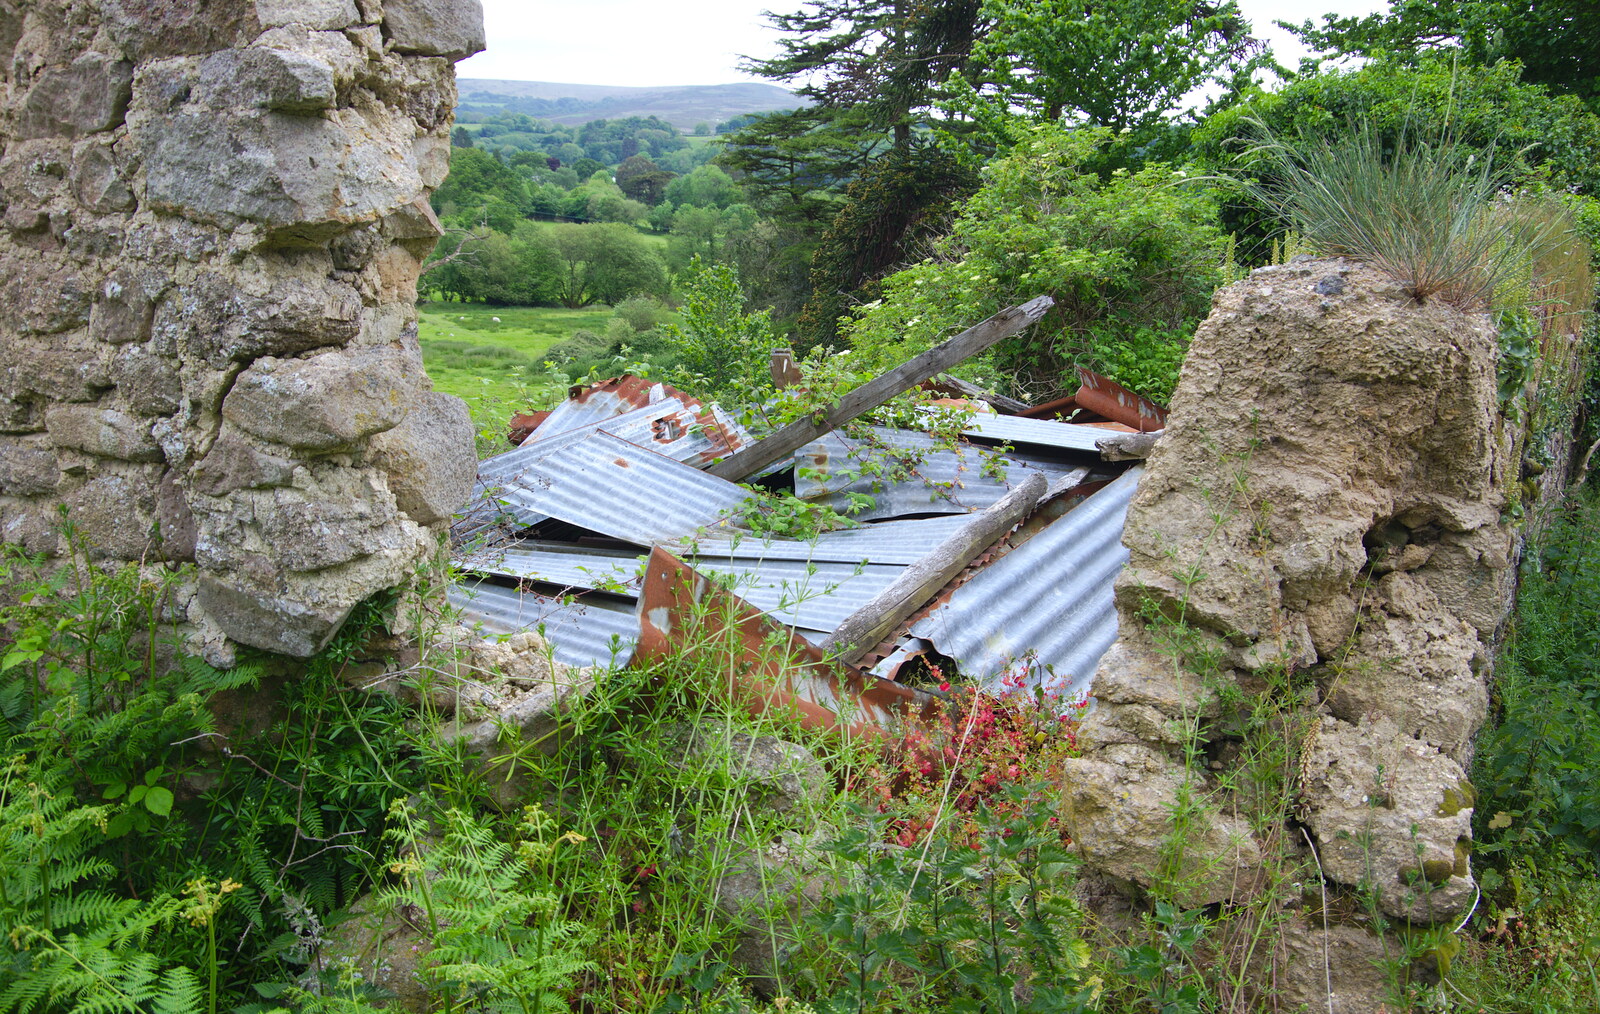 A pile of orrugated iron in the derelict house from The Tom Cobley and a Return to Haytor, Bovey Tracey, Devon - 27th May 2019